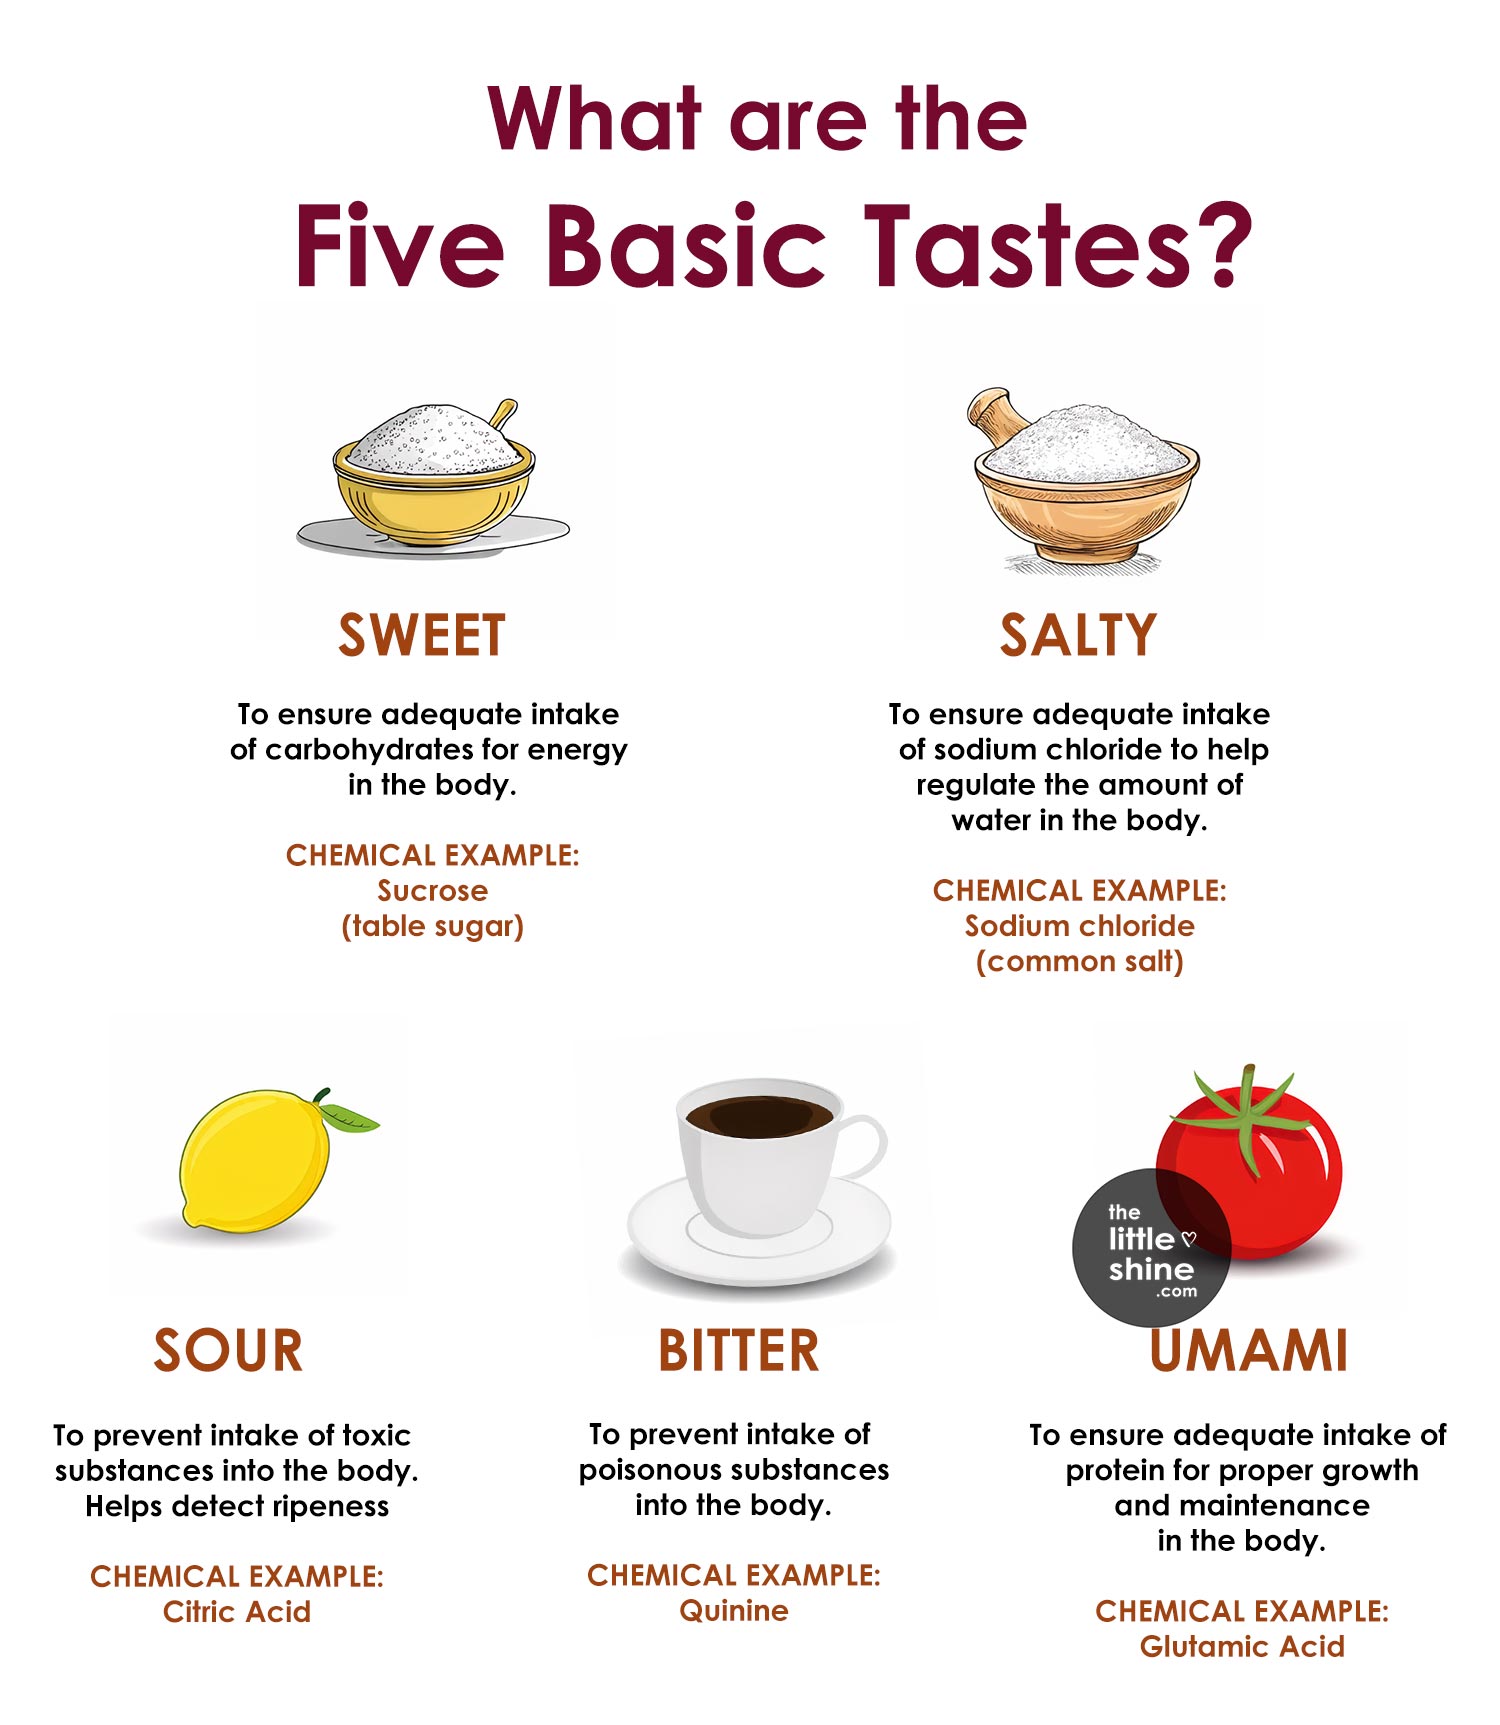 What Are The Five Basic Tastes?